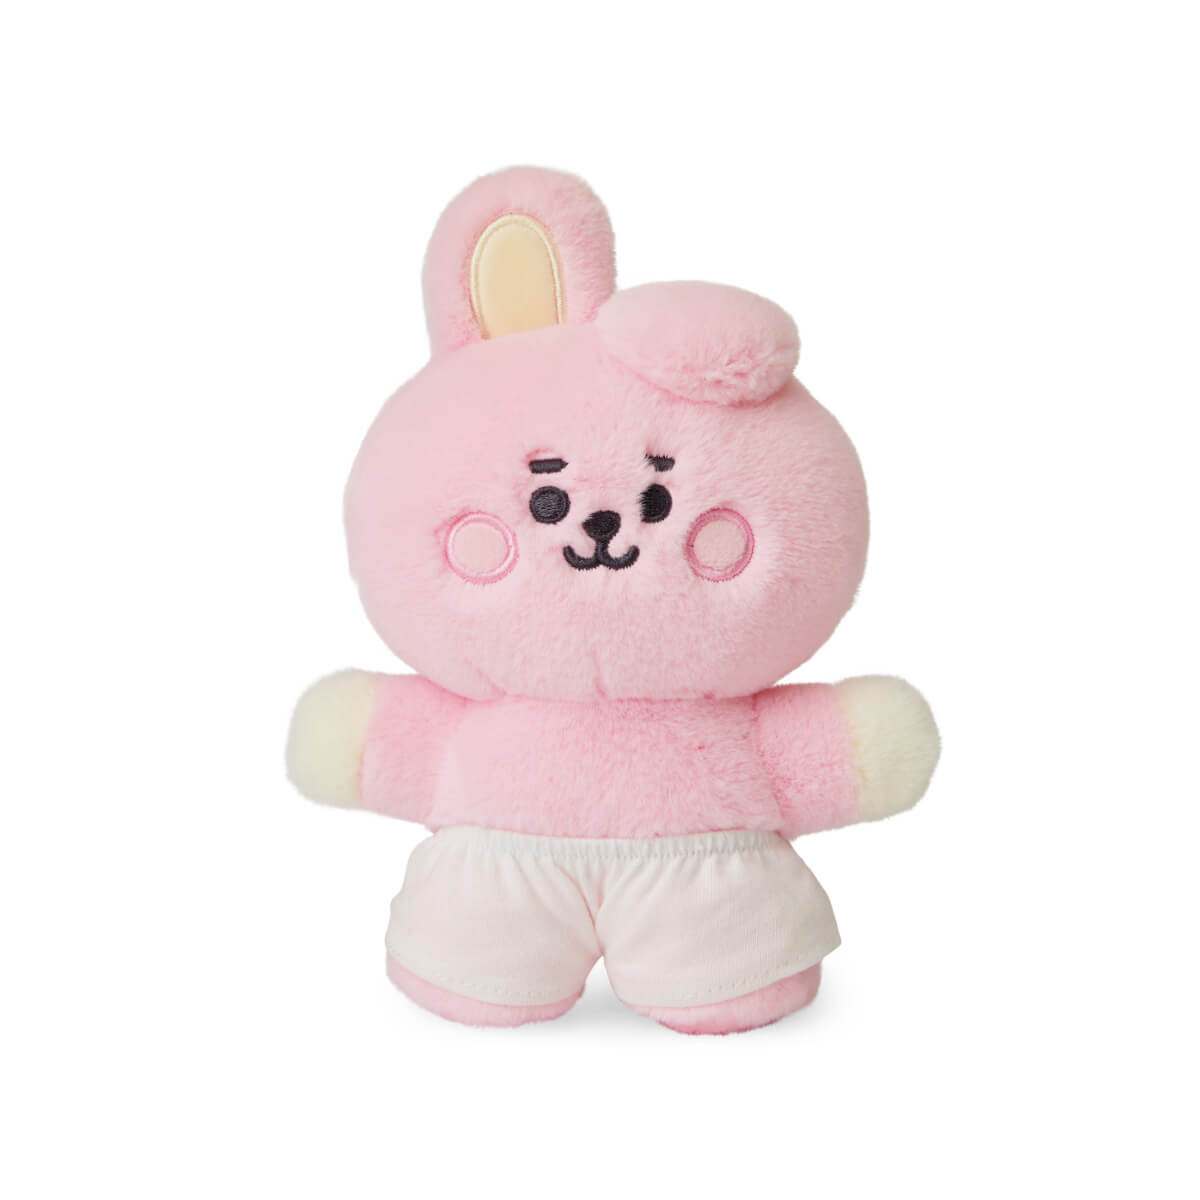 BT21 COOKY BABY Costume Plush